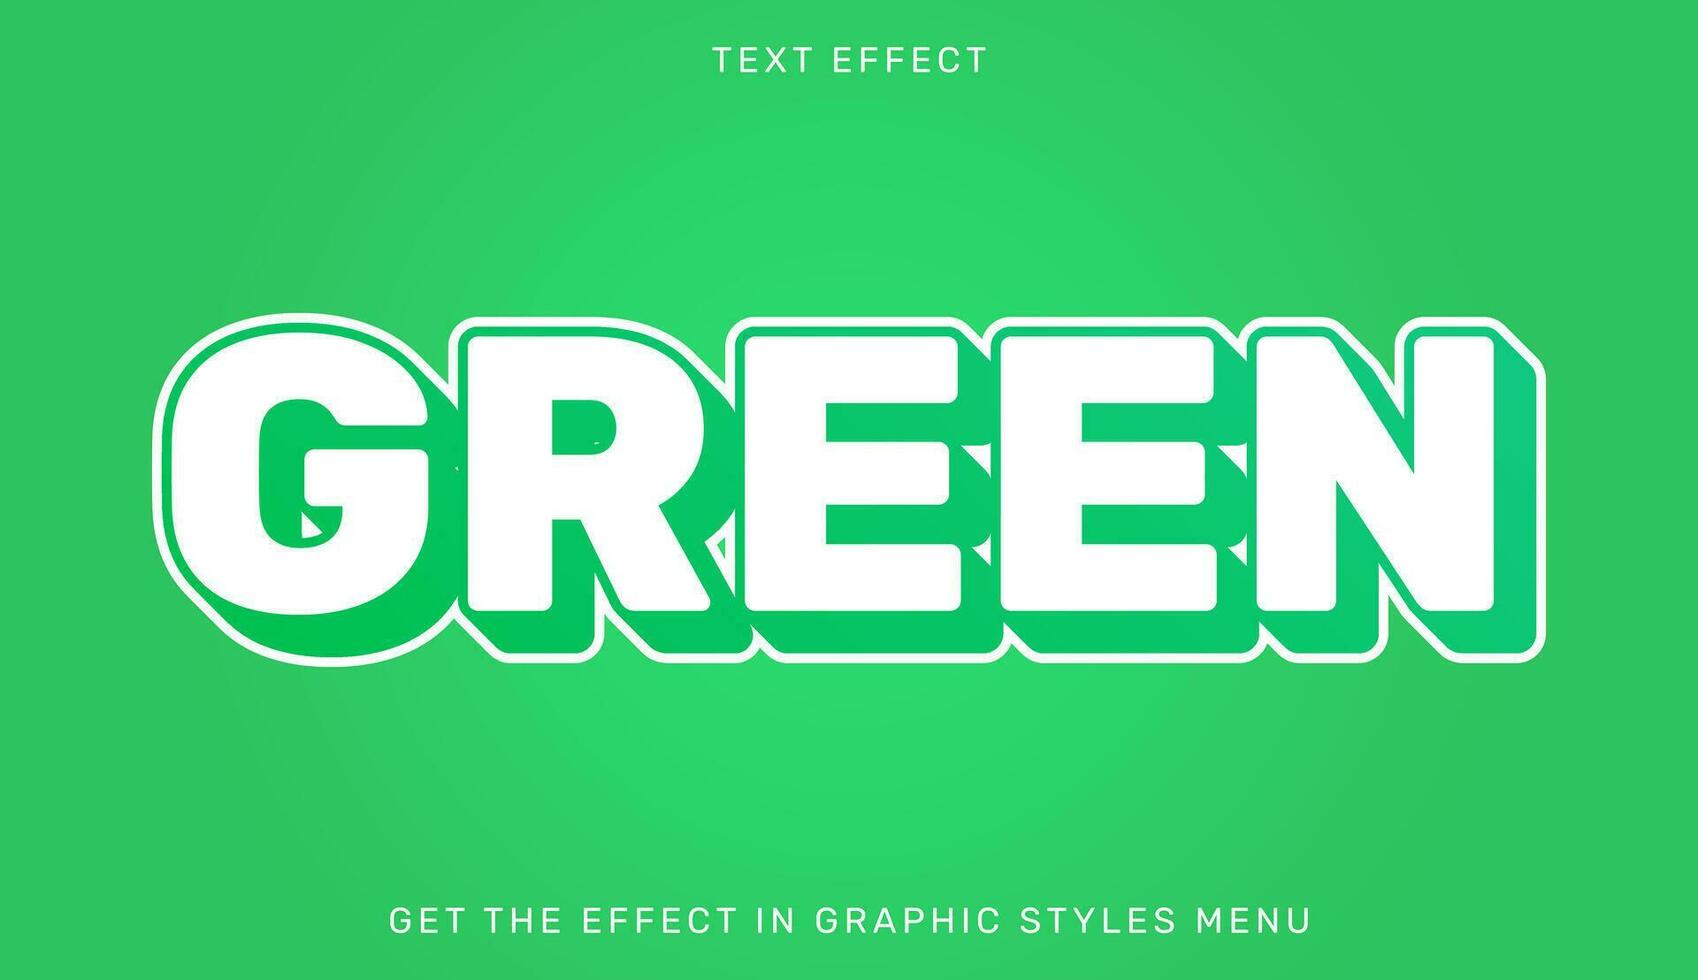 Editable green text effect in 3d style with green and white colors. Text emblem for branding or business logo vector